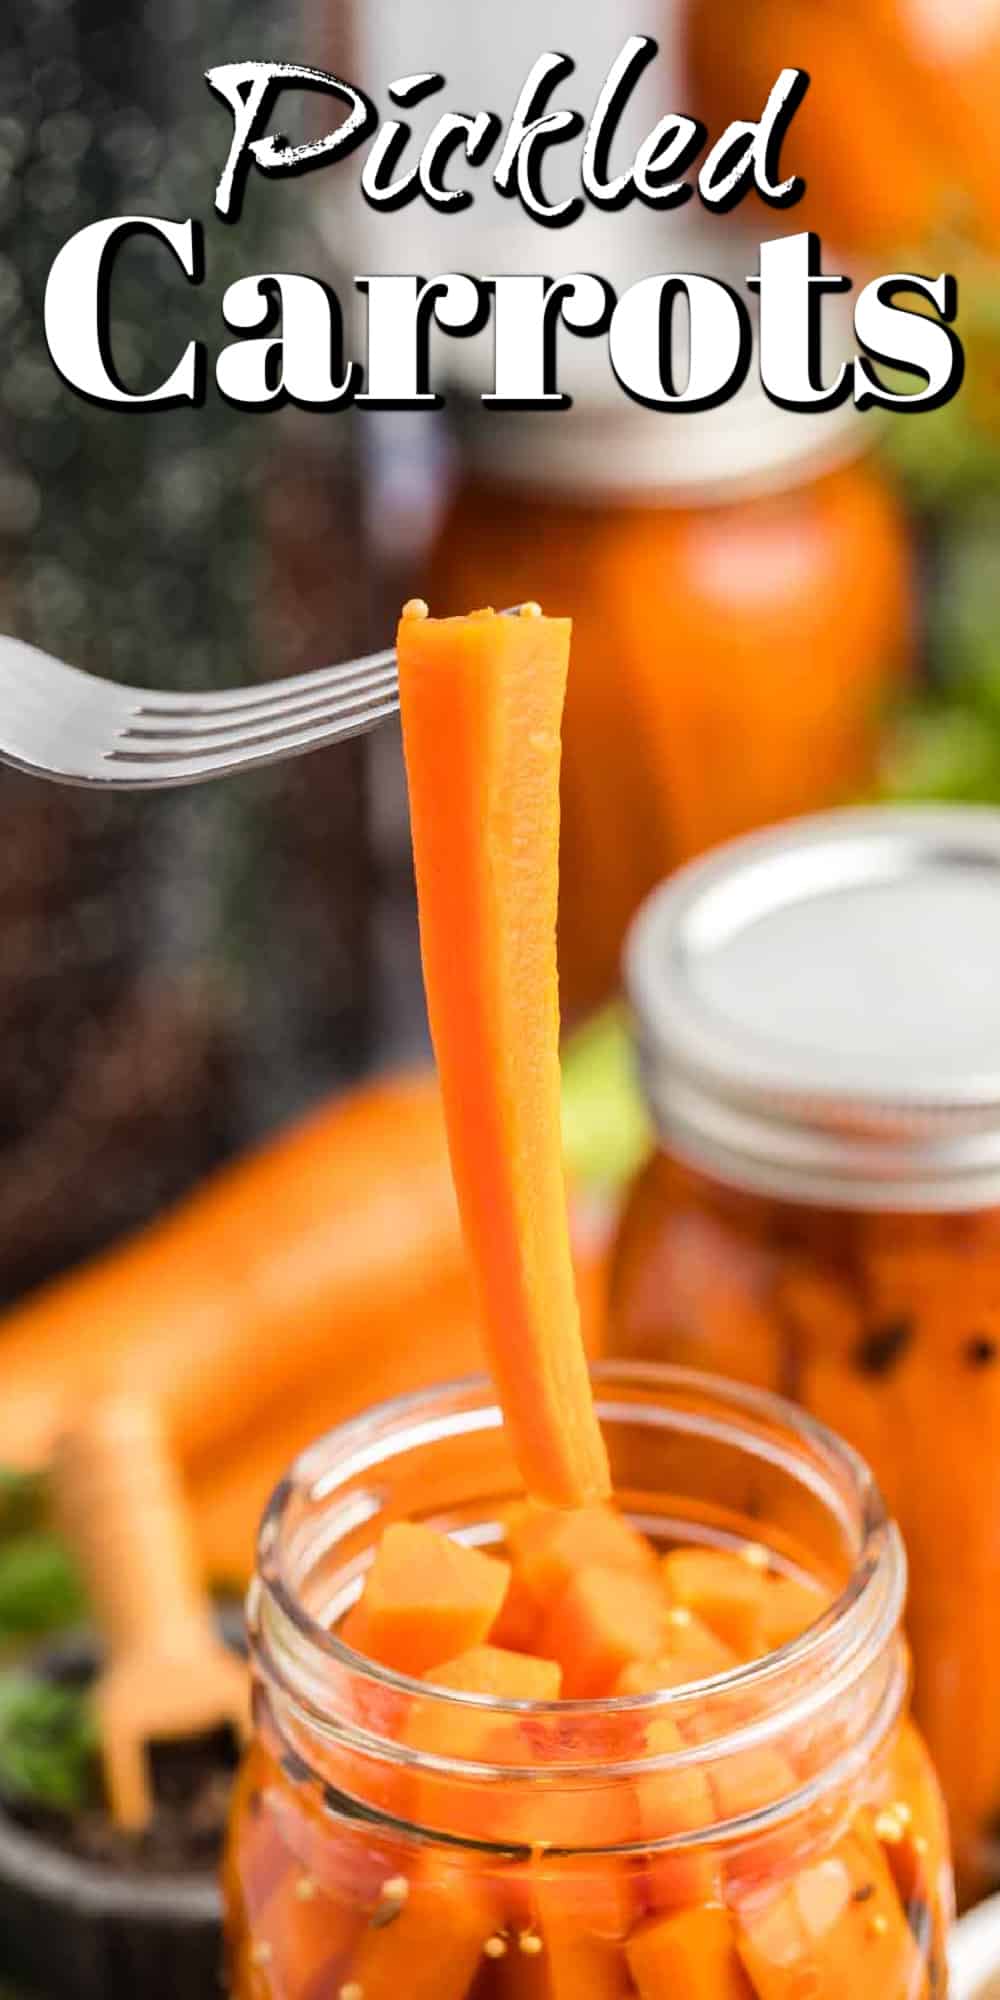 Pickled Carrots Recipe Pin.